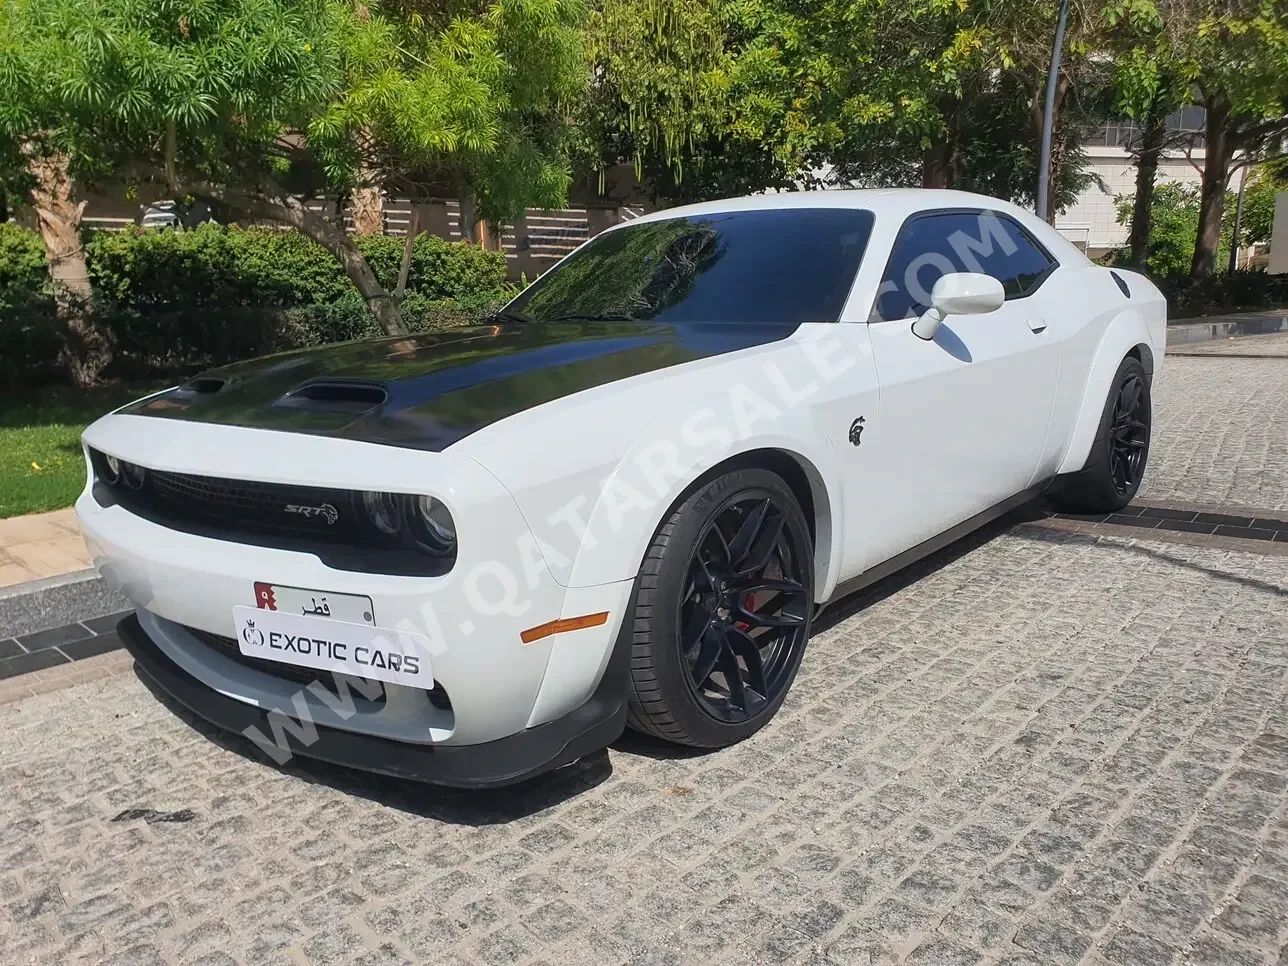 Dodge  Challenger  Hellcat  2016  Automatic  33,000 Km  8 Cylinder  Rear Wheel Drive (RWD)  Coupe / Sport  White